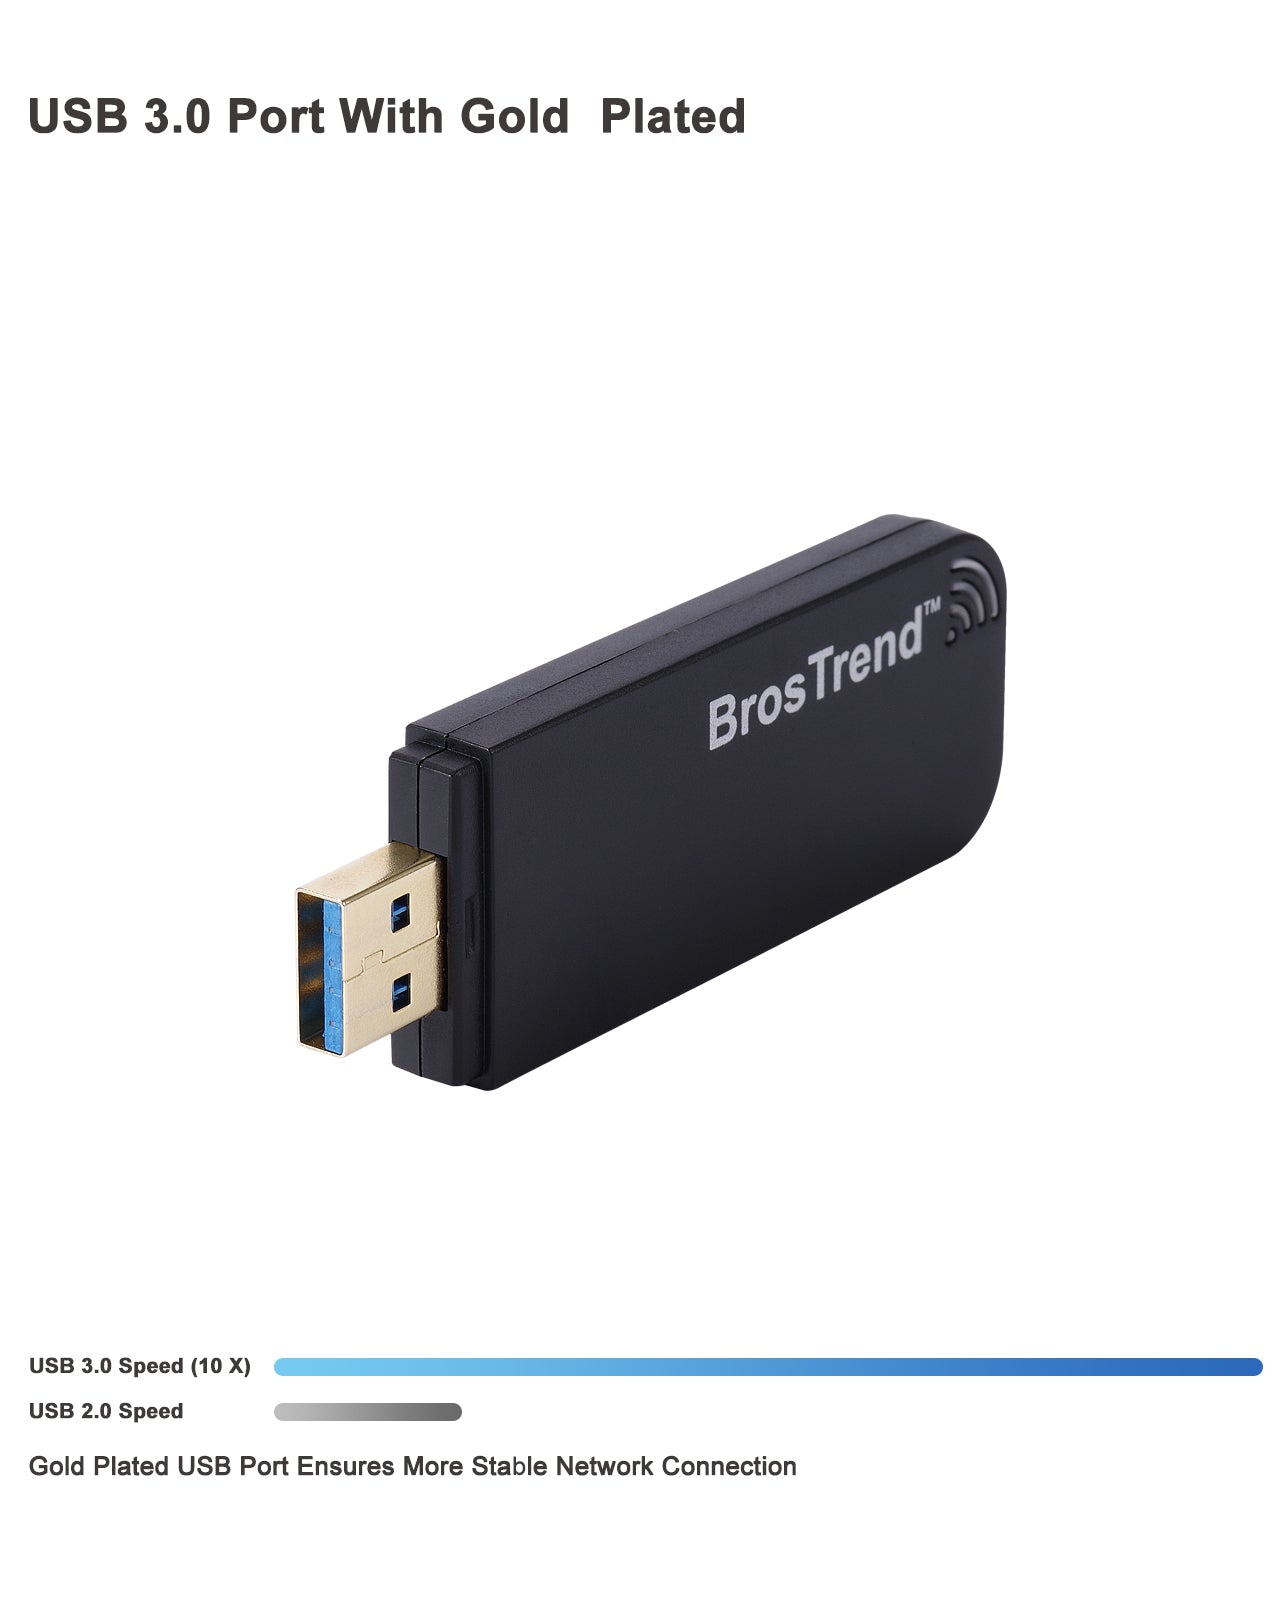 BrosTrend 1200Mbps Linux USB WiFi Network Dongle For UK Market